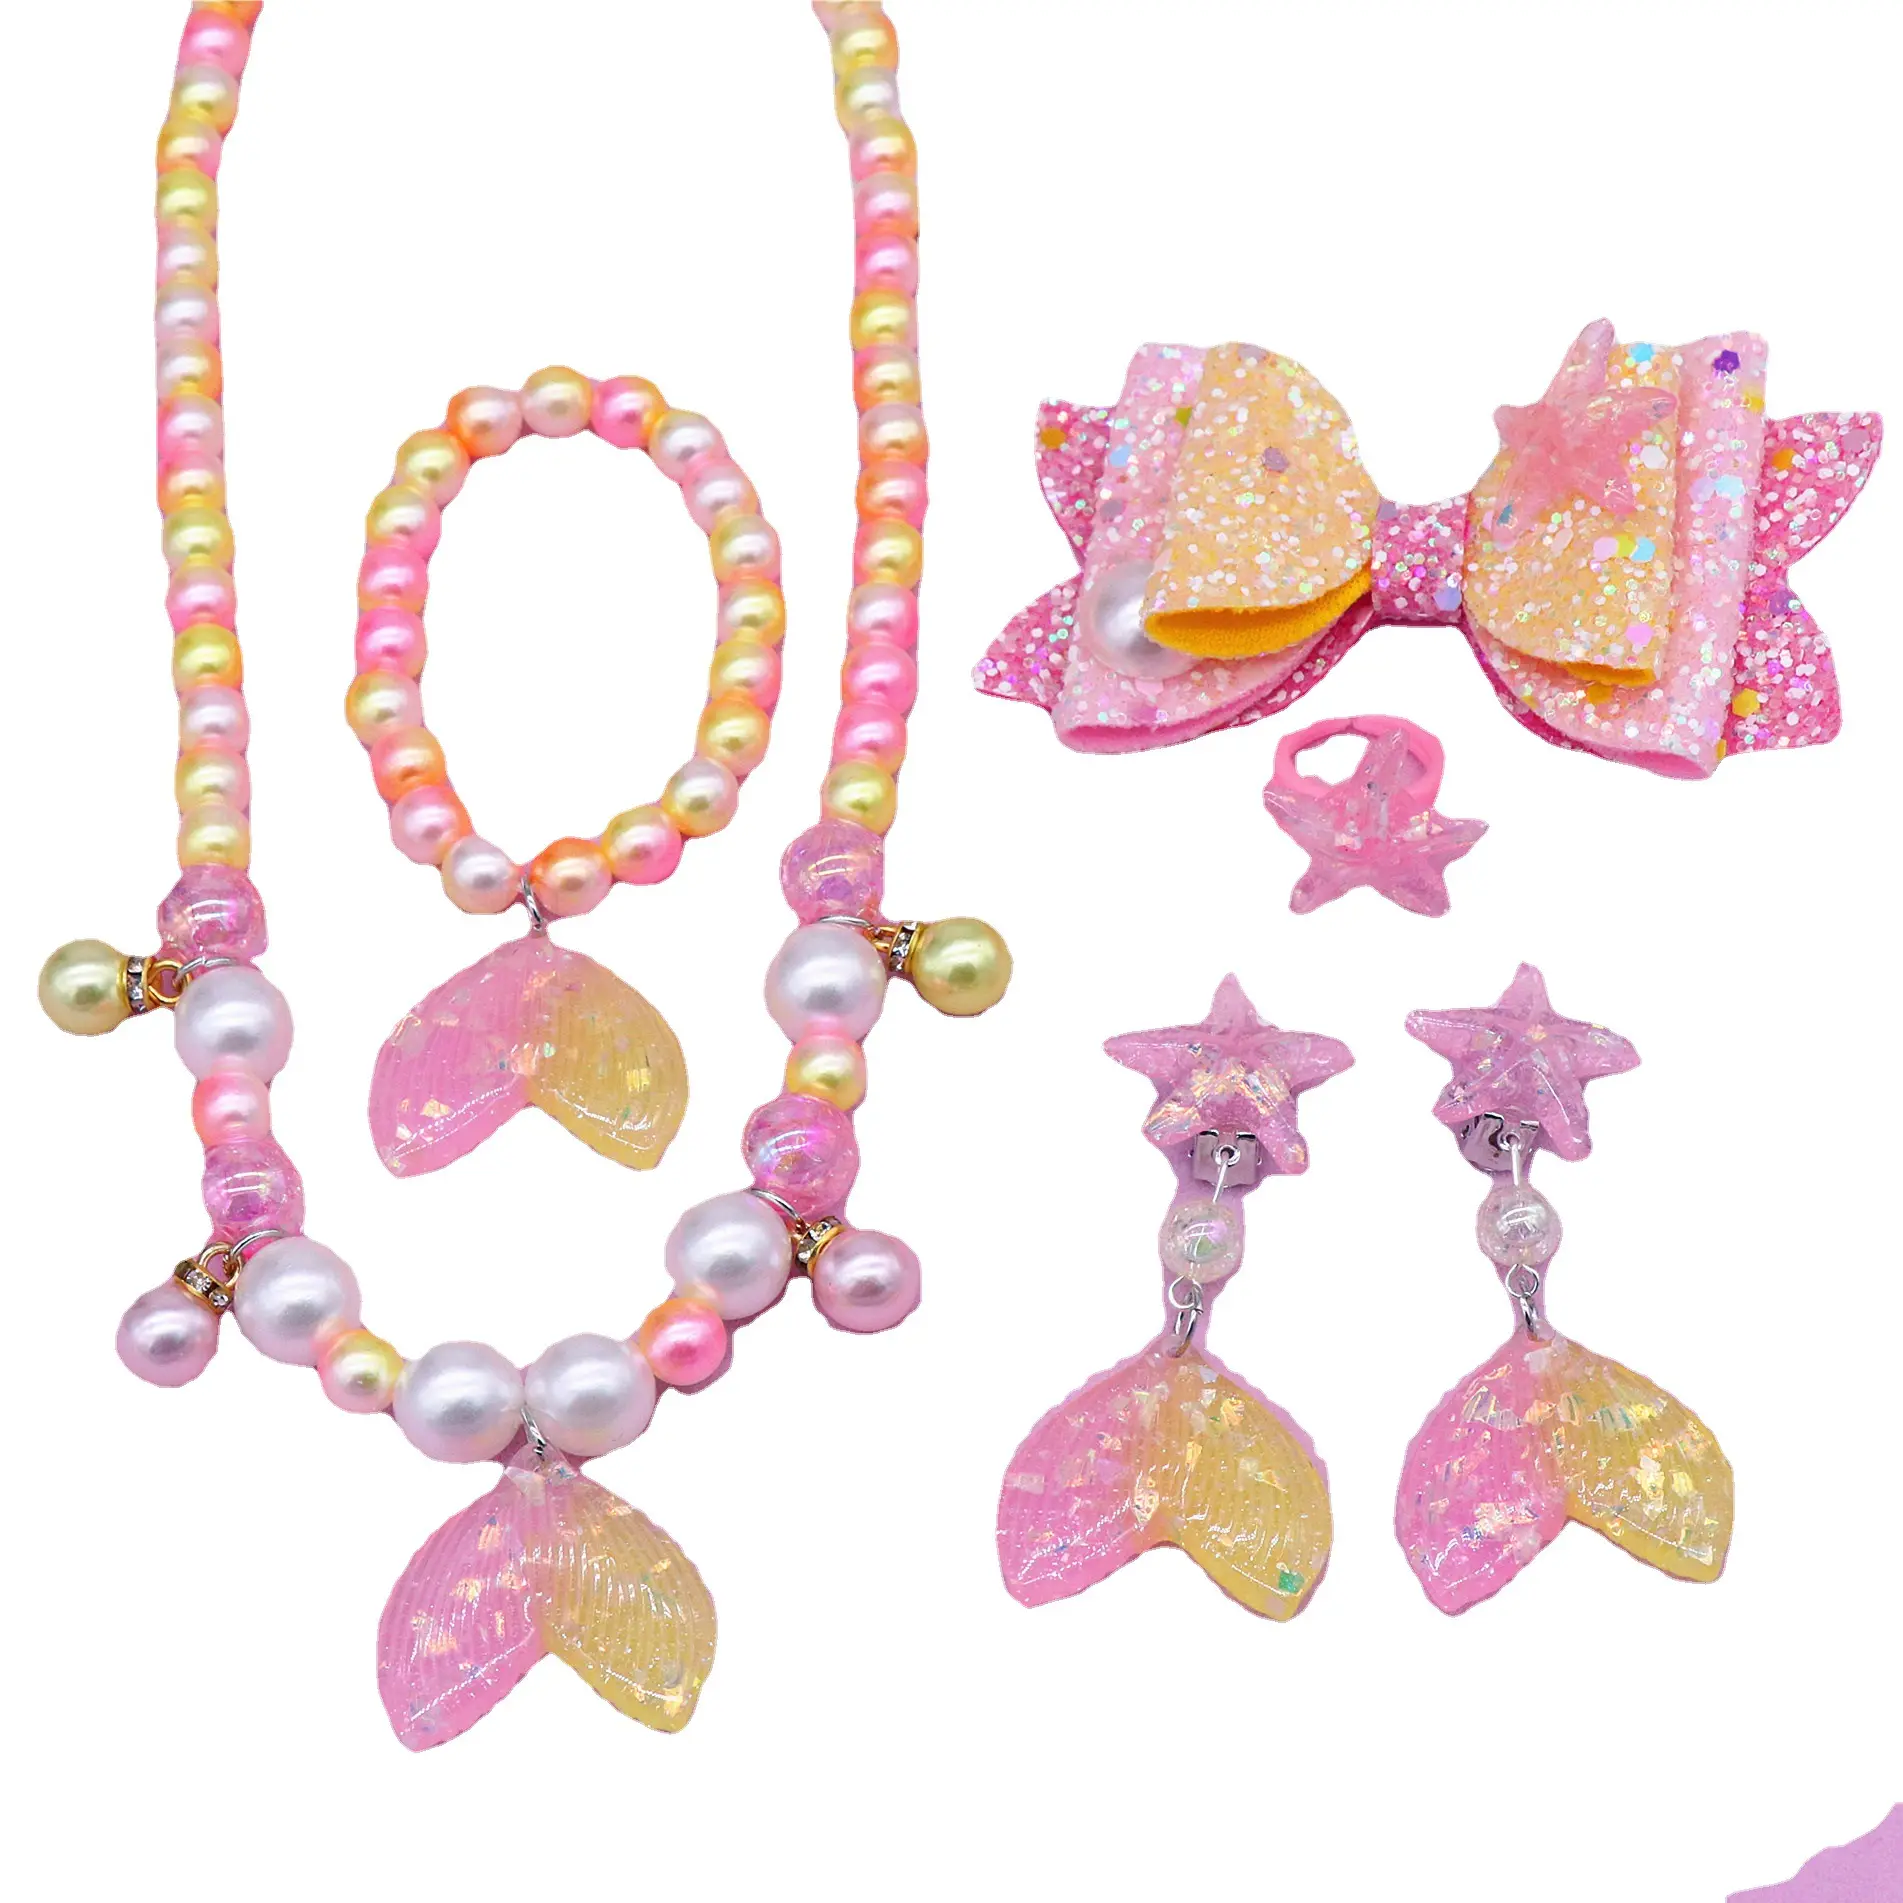 Cartoon Jewelry Mermaid Fish Tail Pearls And Beads Necklace Kids Jewelry Set Chain Necklaces